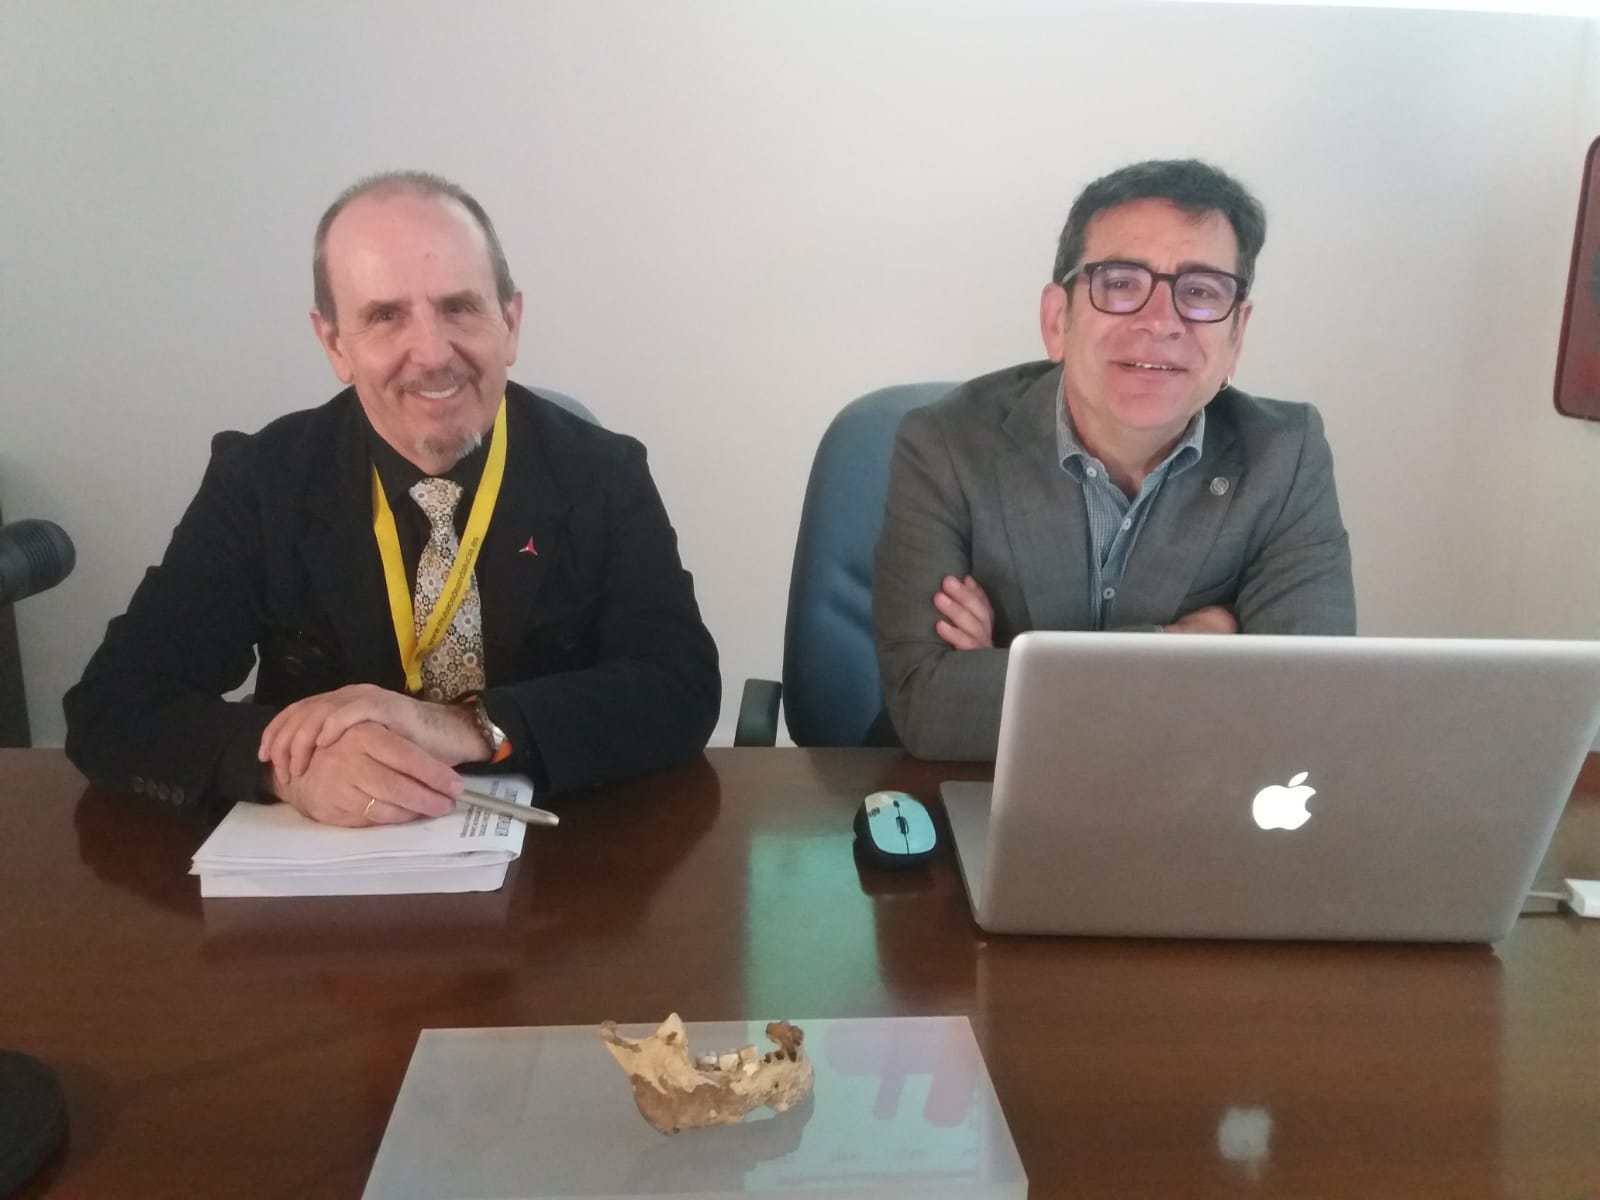 Two researchers sitting together at a table